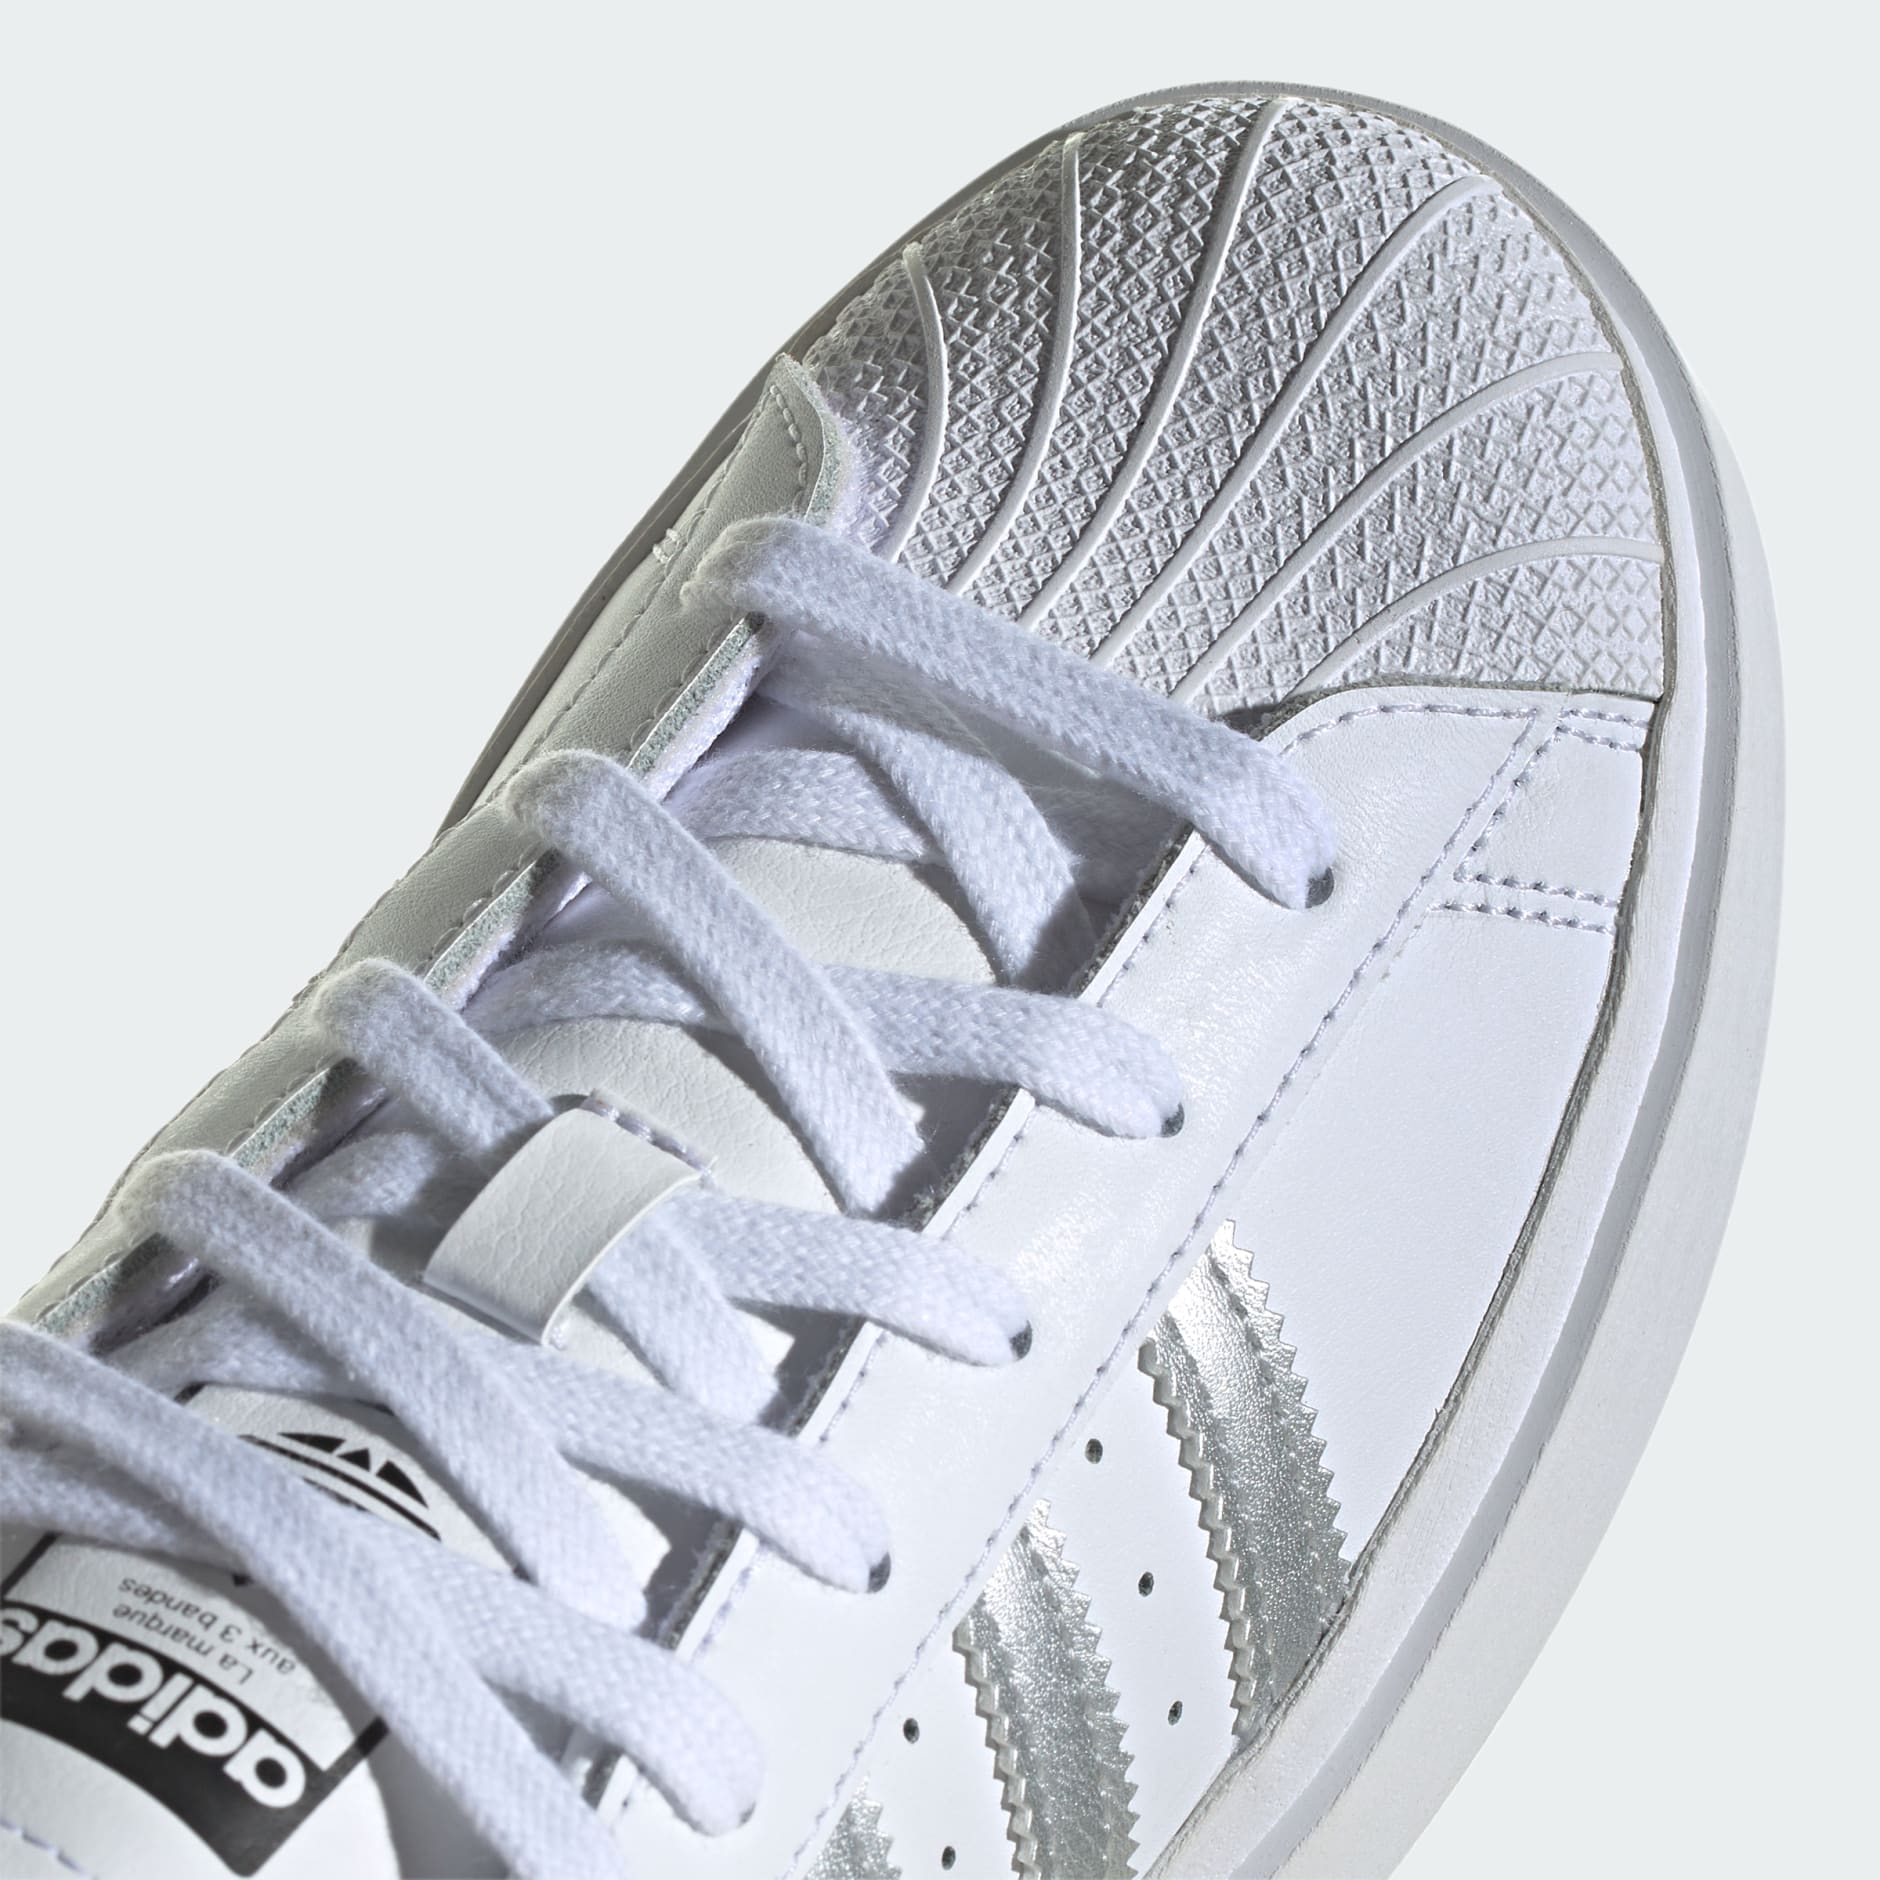 Shoes - Superstar Bonega Shoes - White | adidas South Africa